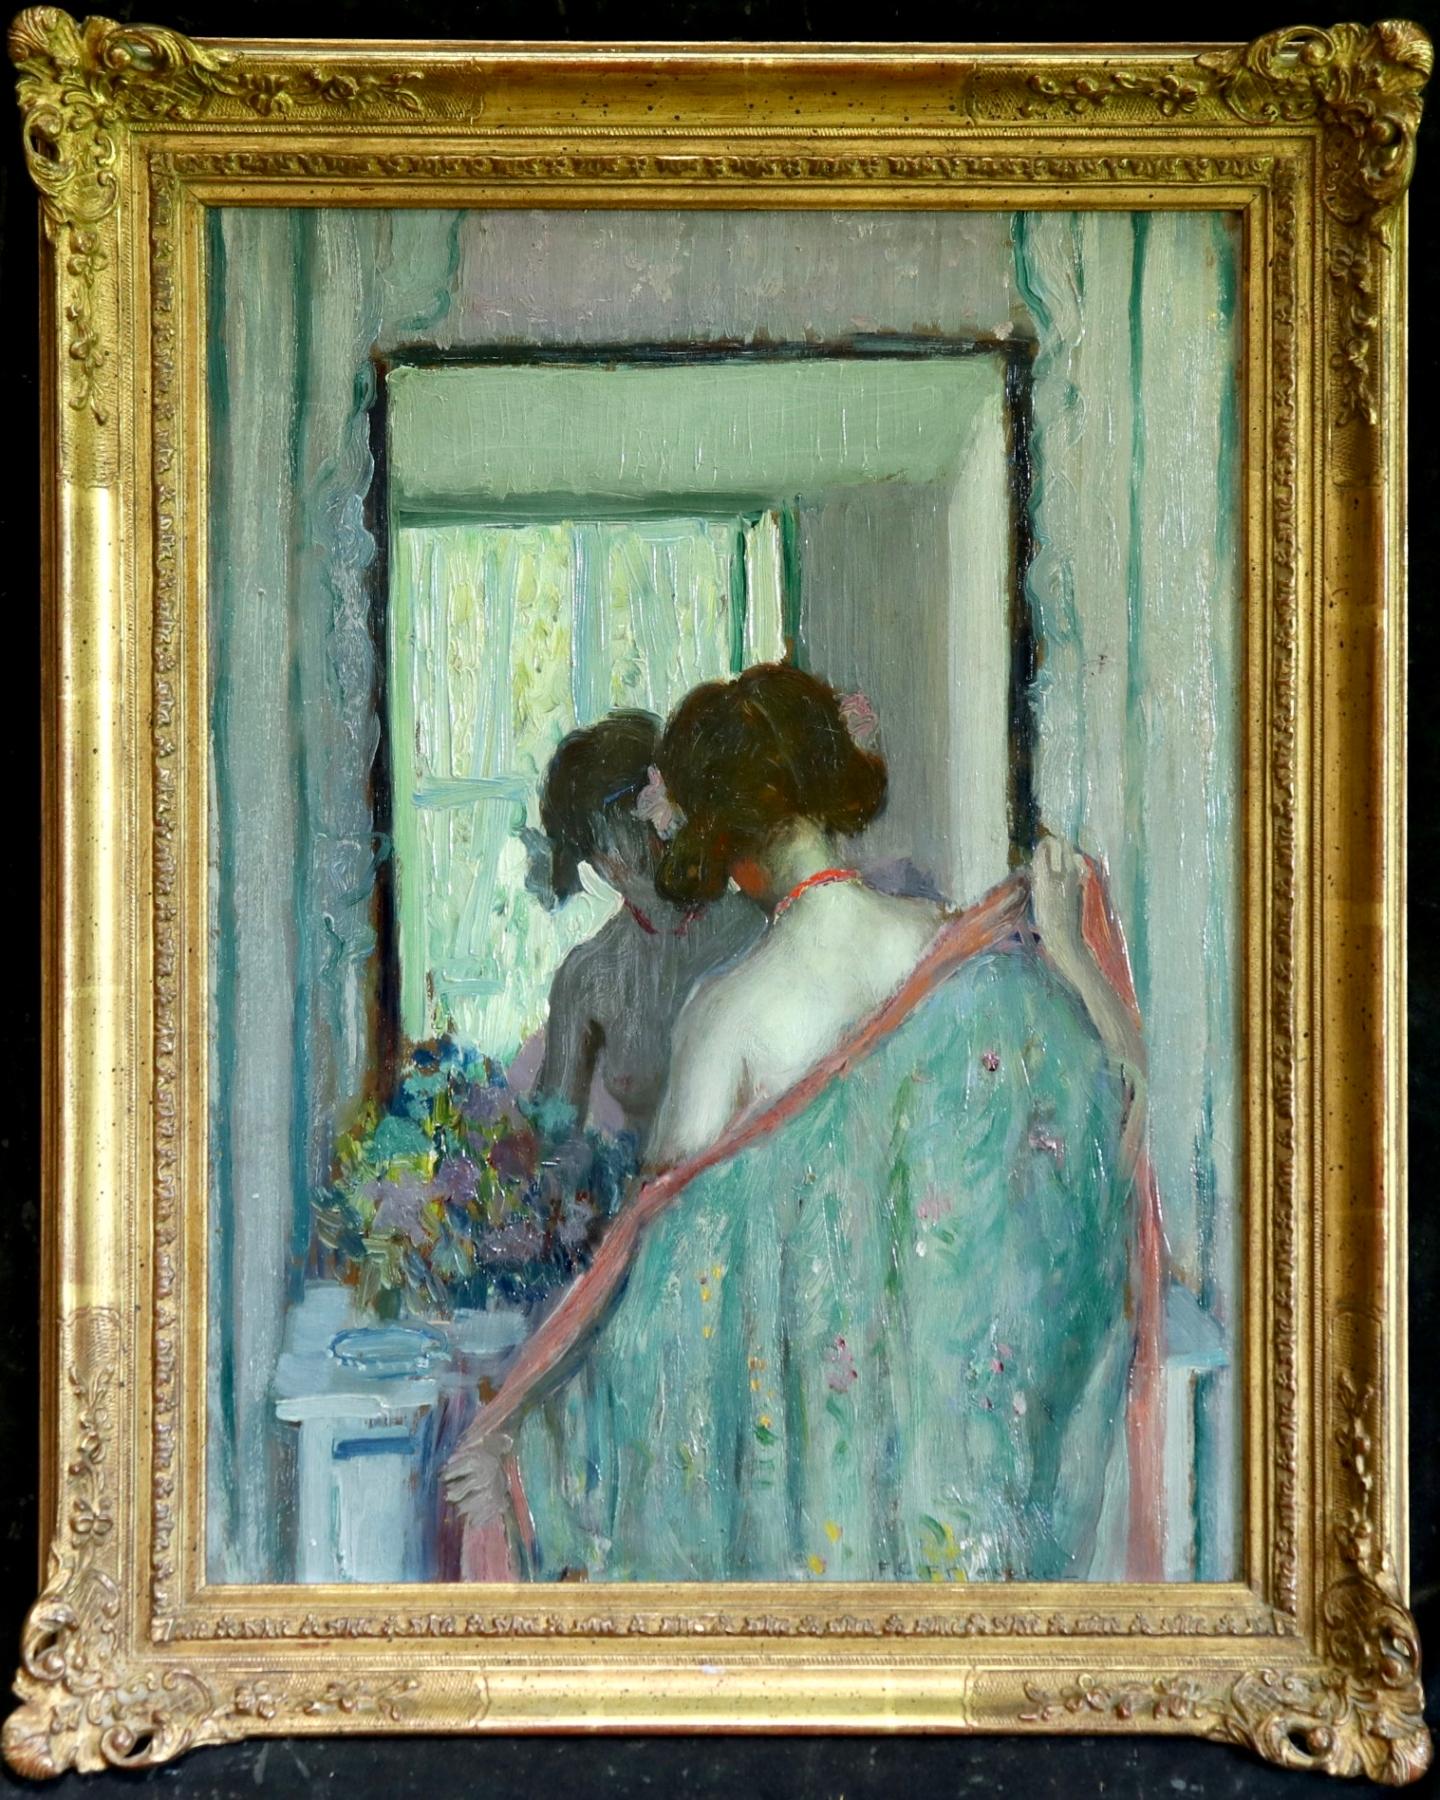 Reflections - Girl in a Mirror - American Impressionist Oil - Frederick Frieseke - Painting by Frederick Carl Frieseke